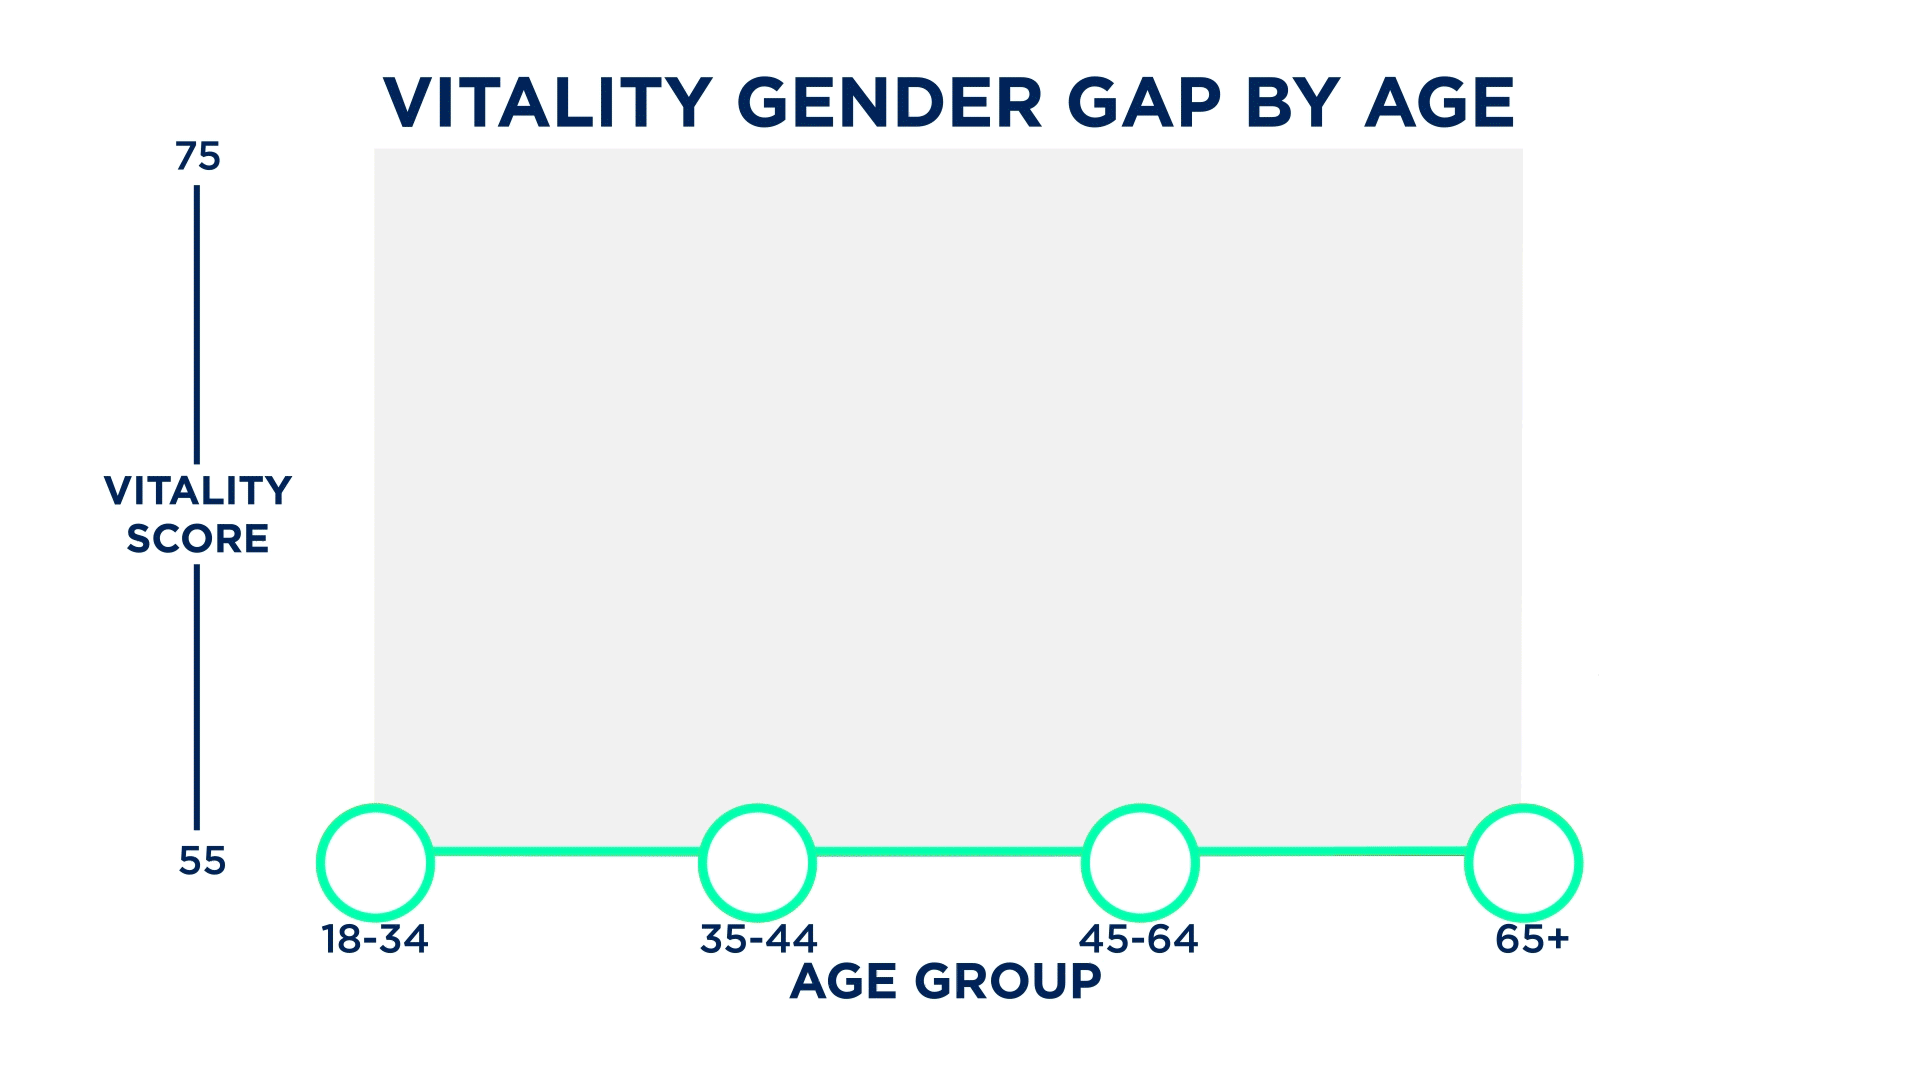 The study reveals that women struggle disproportionately with their vitality and overall well-being. Women are 50% more likely to have low vitality levels than men (18% vs. 12%).